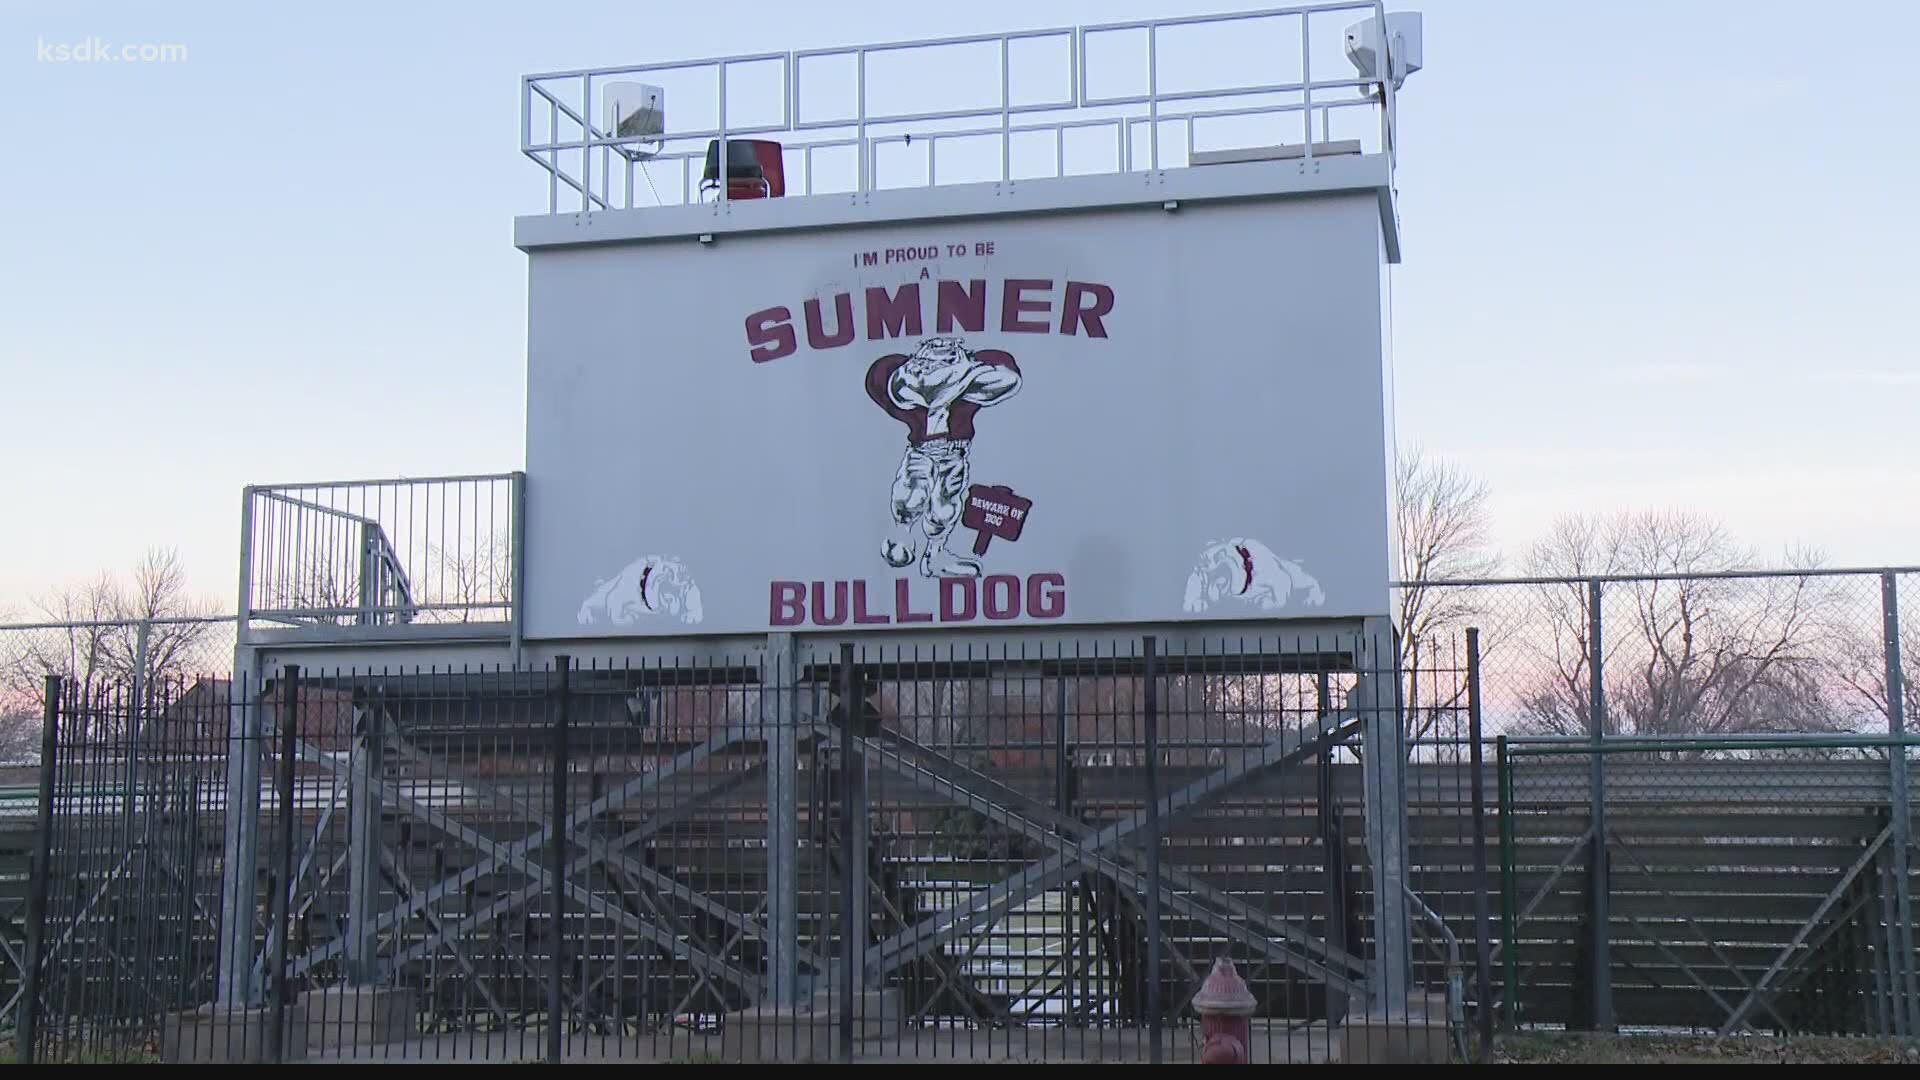 Sumner High School is the first Black high school west of the Mississippi River